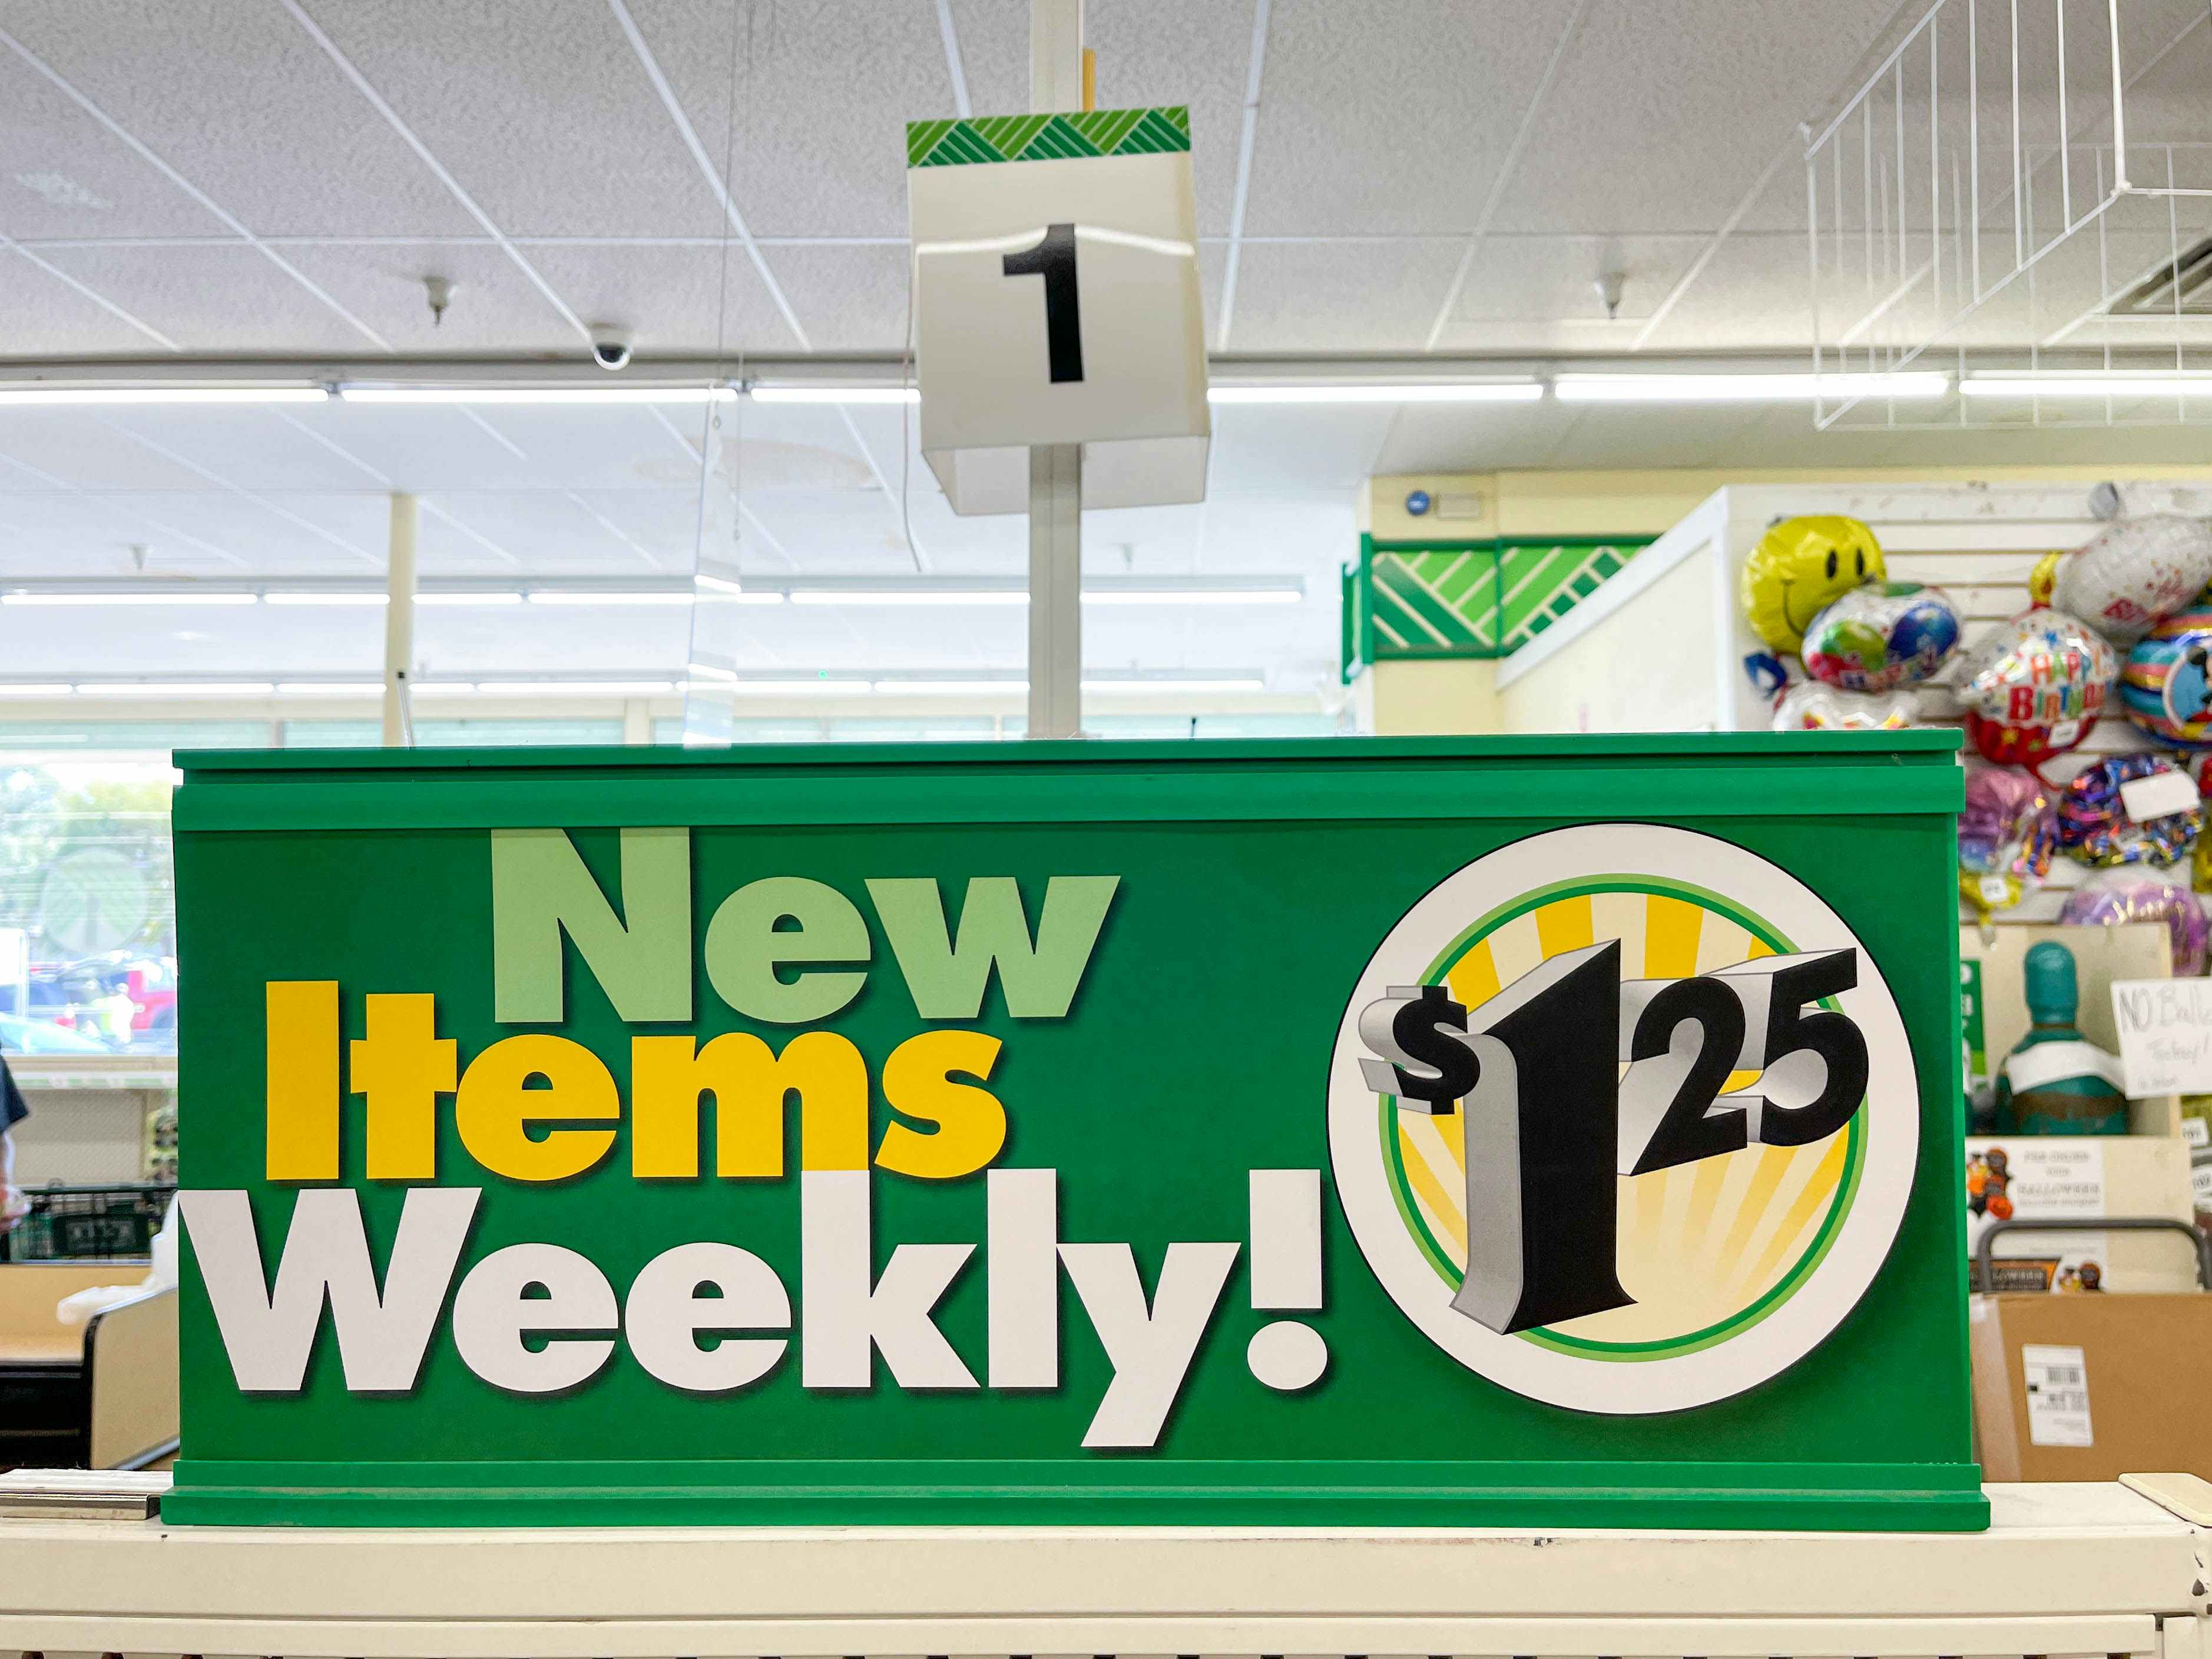 A new items weekly dollar tree price sign